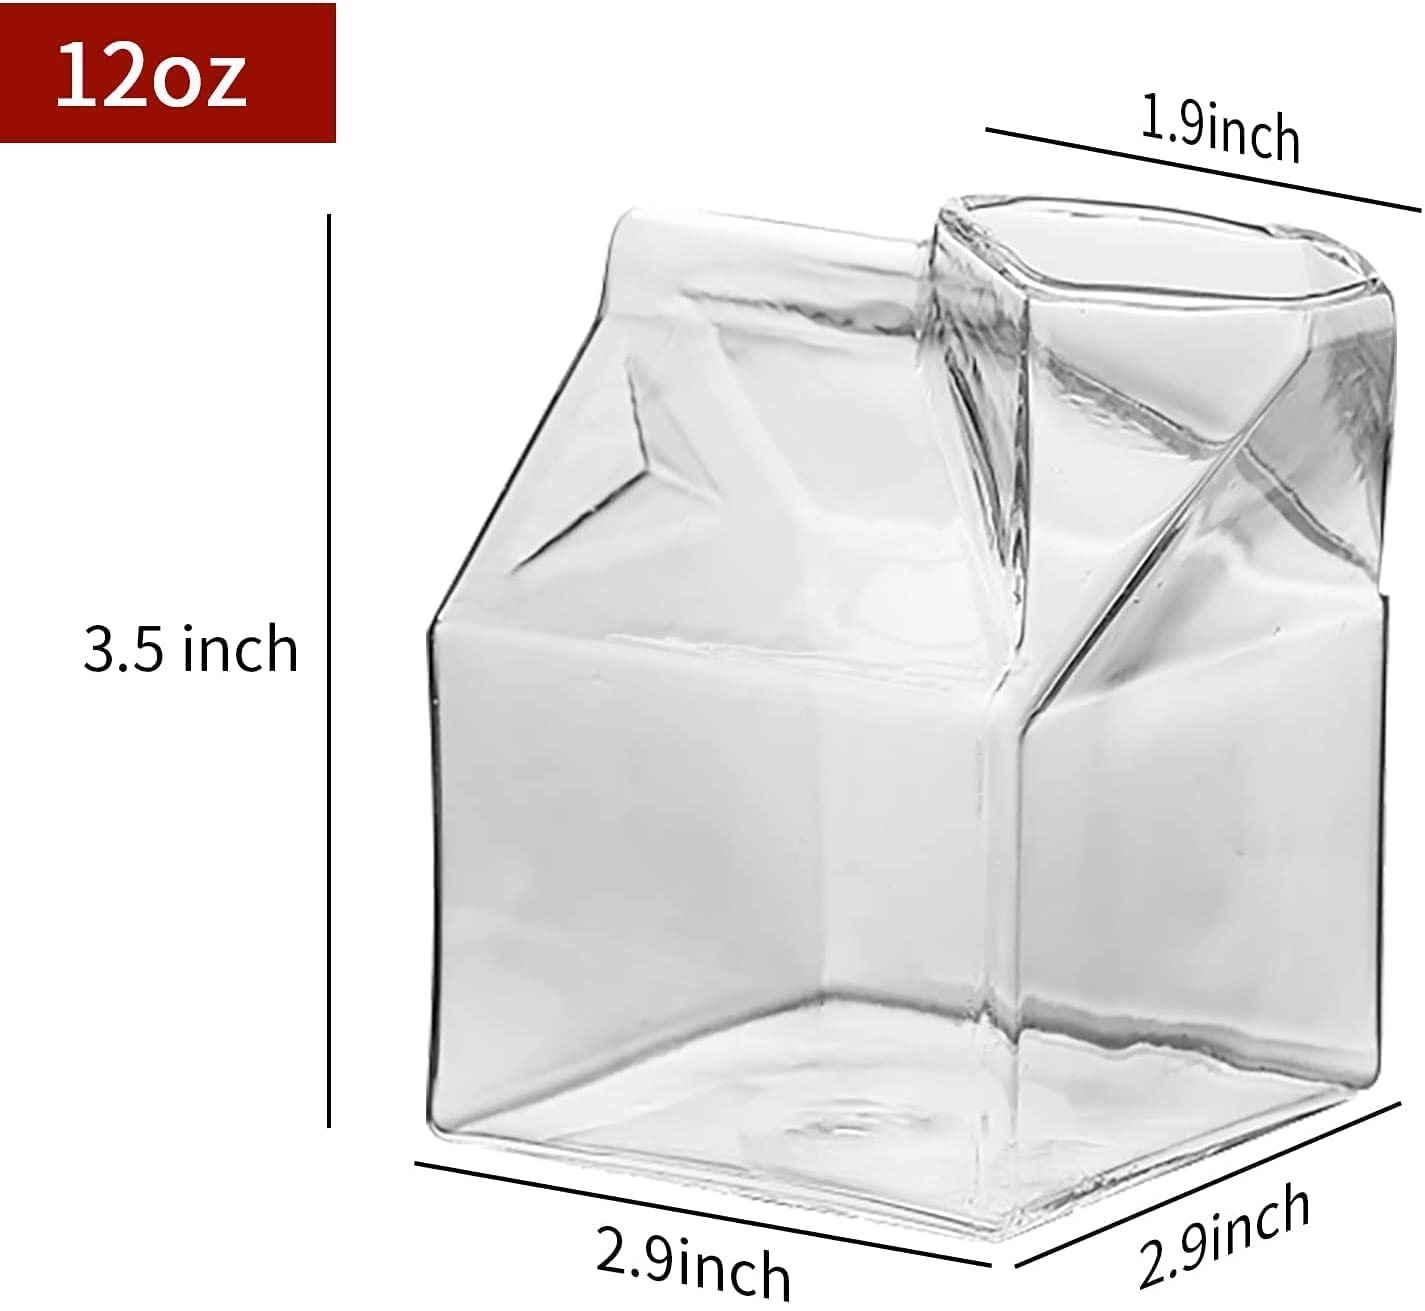 Cocktail Glasses 12oz/360ml Set of 2 Glass Milk Carton Box Creamers Lead-Free Martini Glass Mixing Cups Mini House-shaped Square Container Pitcher for Cocktails Milk Coffee Juice Whiskey Gift